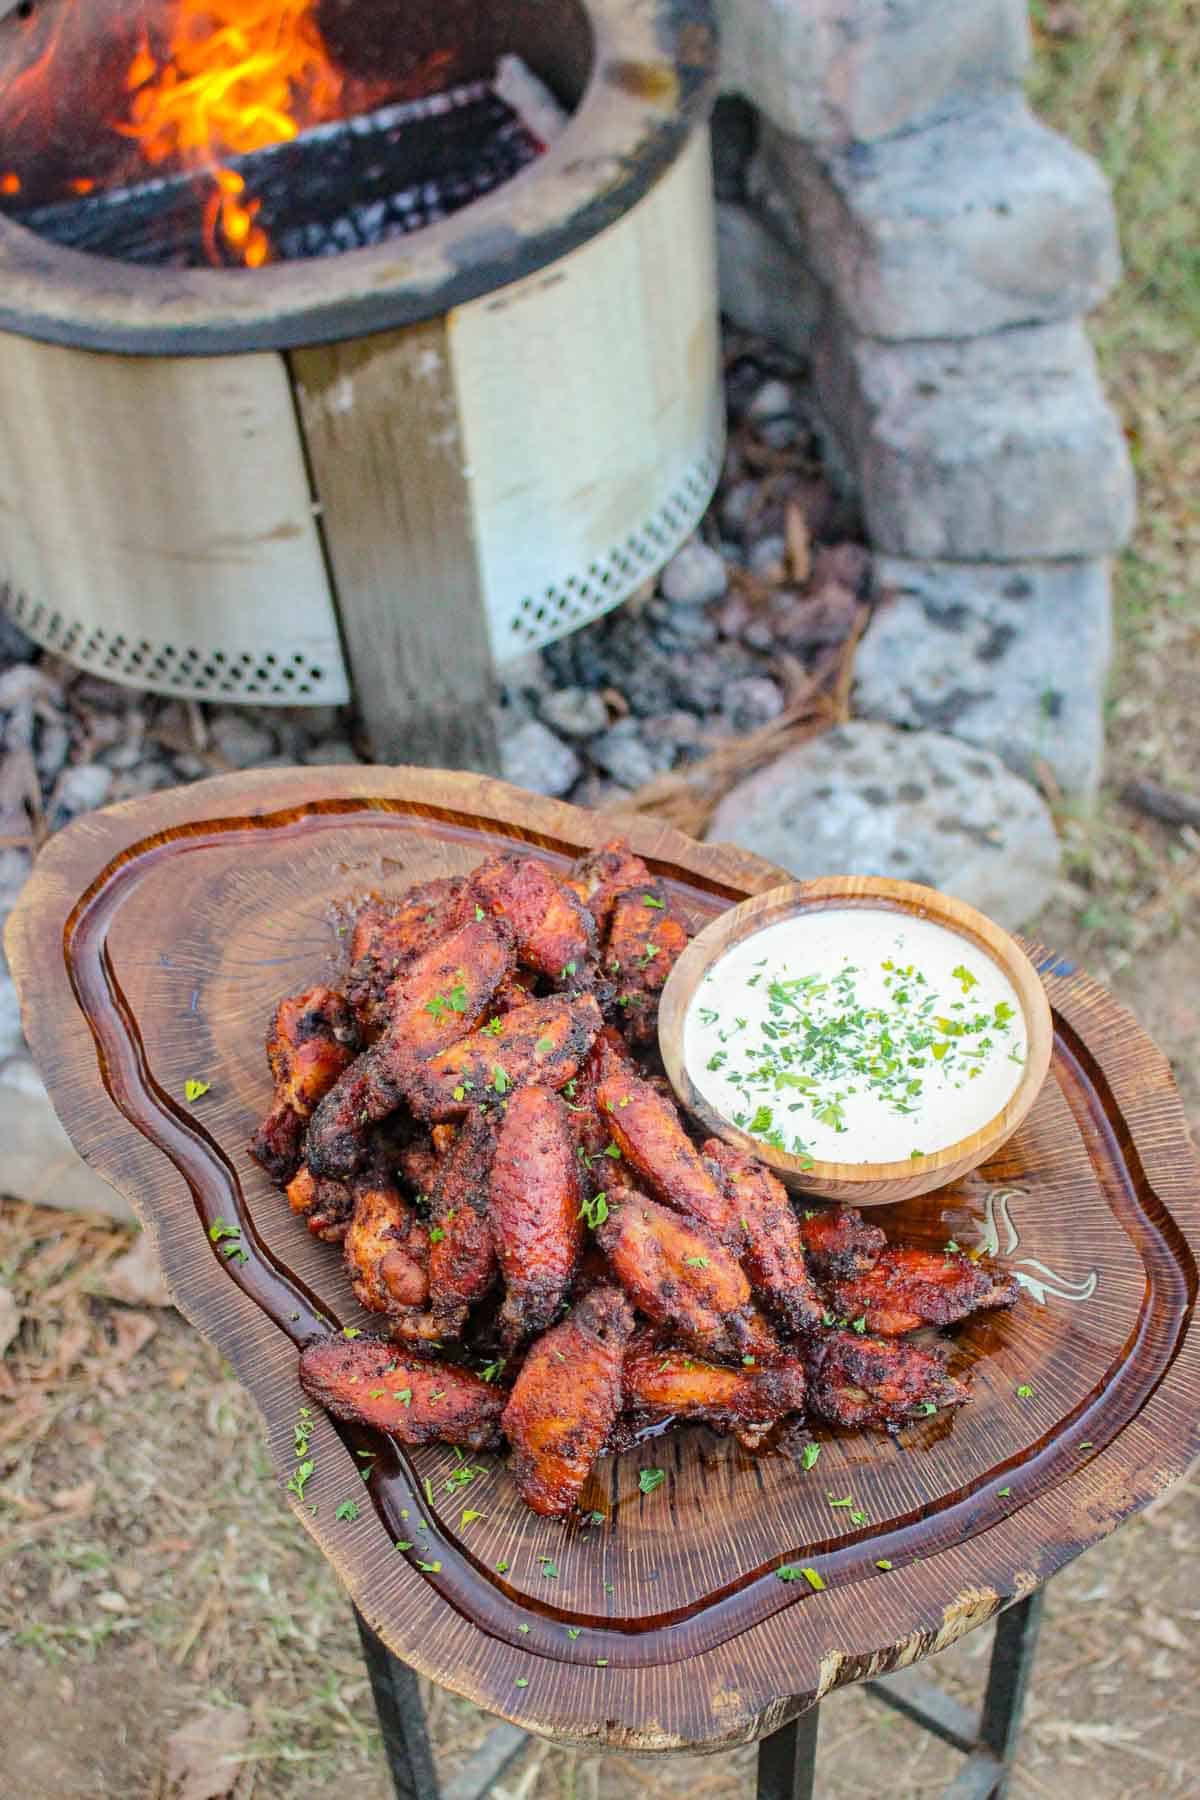 The Nashville Hot Chicken Wings and Alabama White Sauce ready to devour.